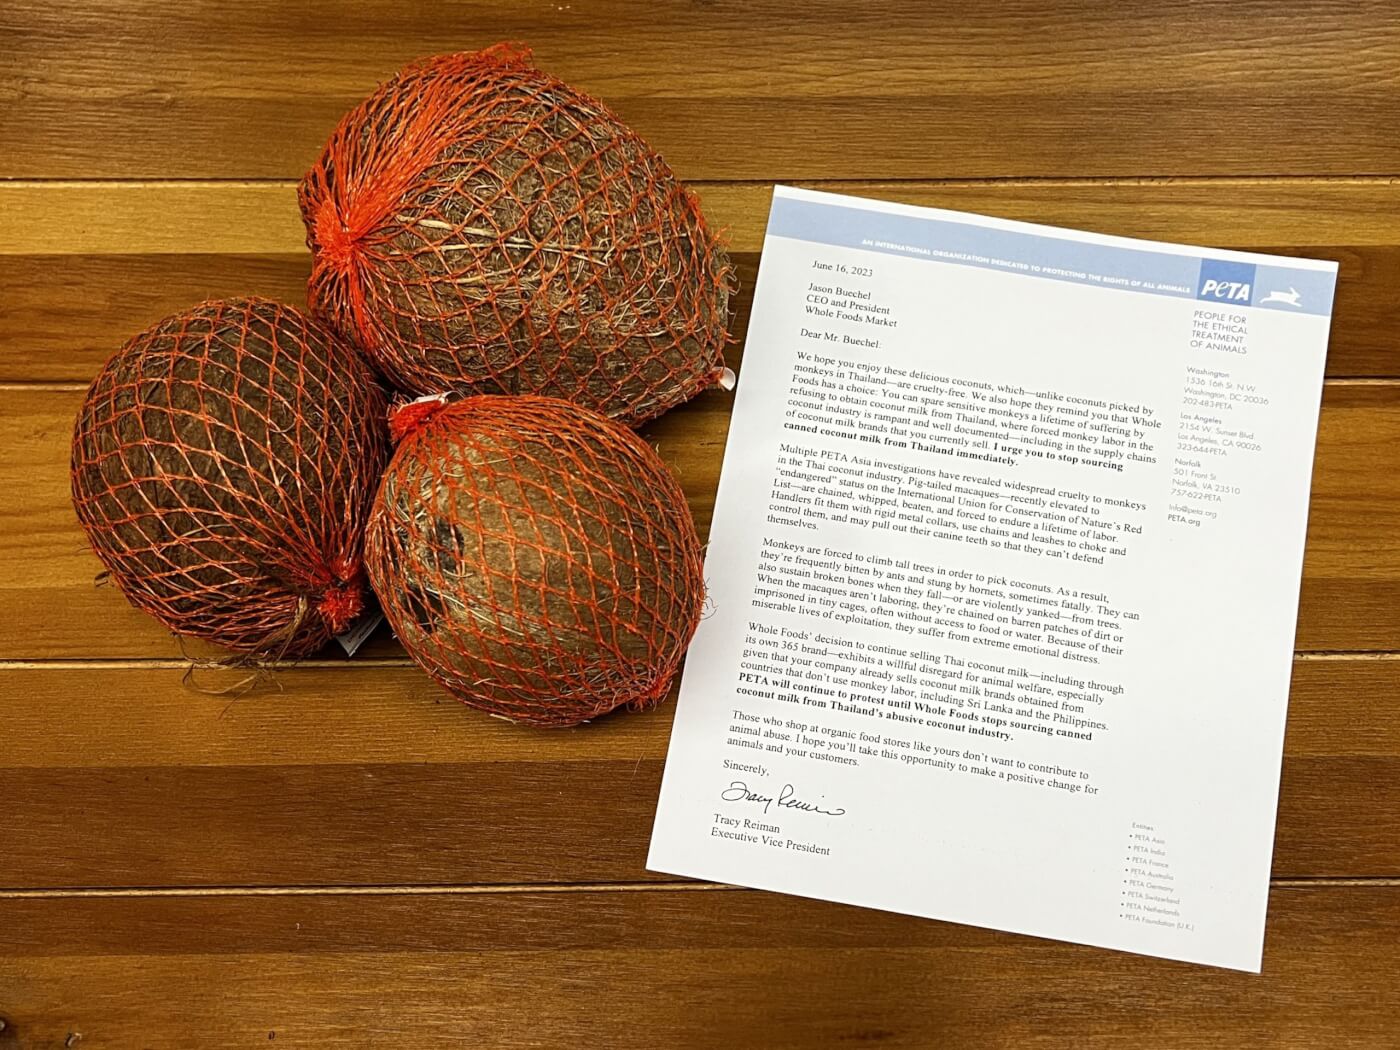 PETA sends coconuts and letter to Whole Foods CEO